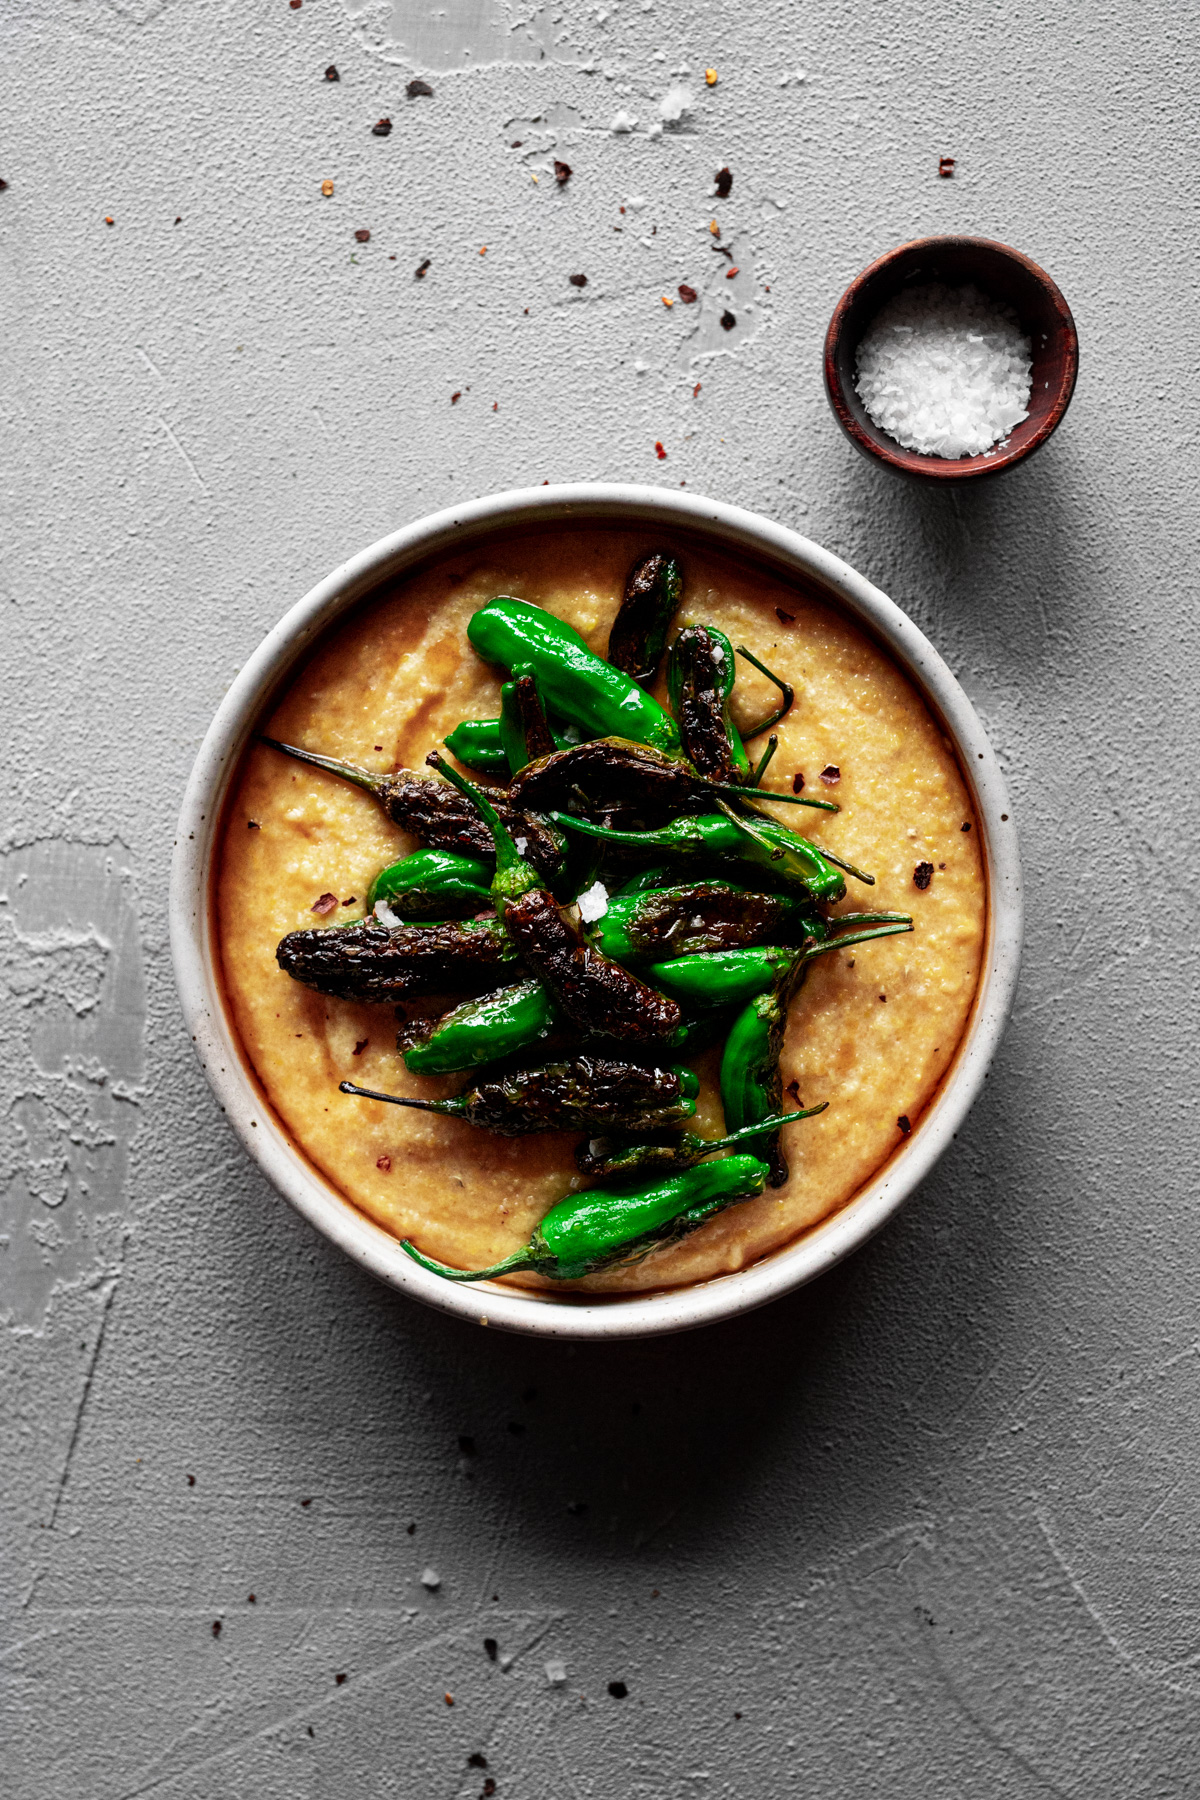 blistered shishito peppers on top of polenta with a honey-soy sauce and hot chili oil